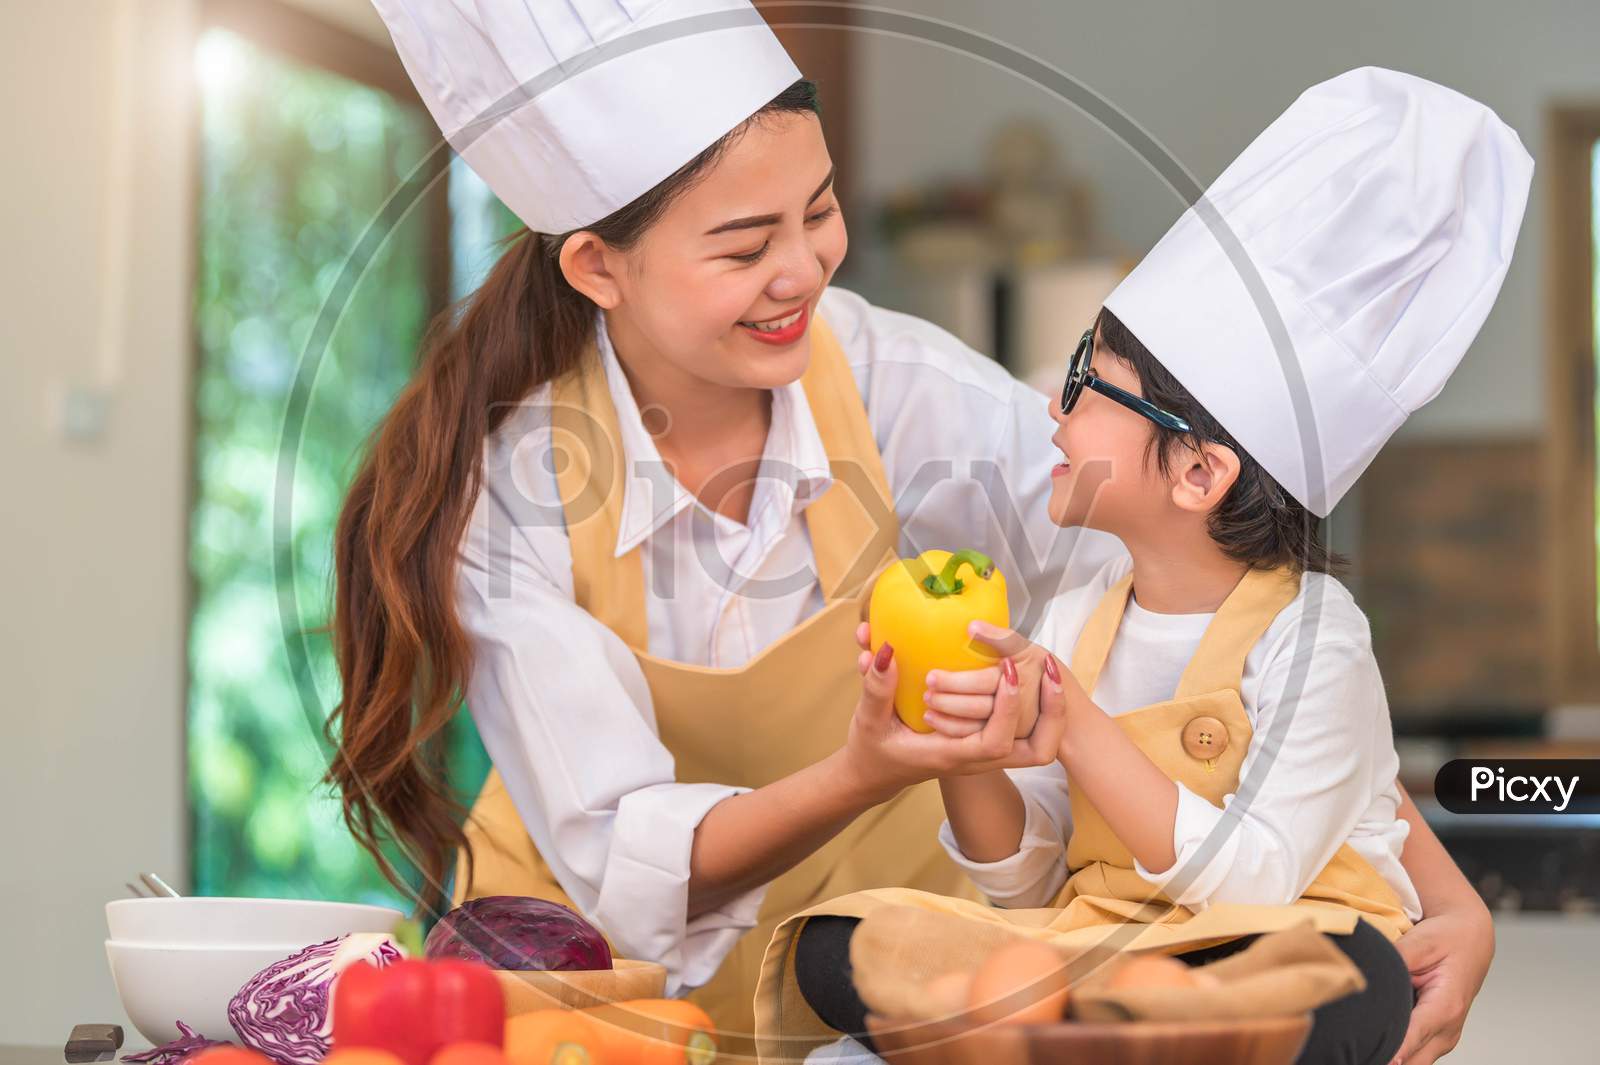 Happy Beautiful Asian Woman And Cute Little Boy With Eyeglasses Prepare To Cooking In Kitchen At Home. People Lifestyles And Family. Homemade Food And Ingredients Concept. Two Thai Looking Each Other